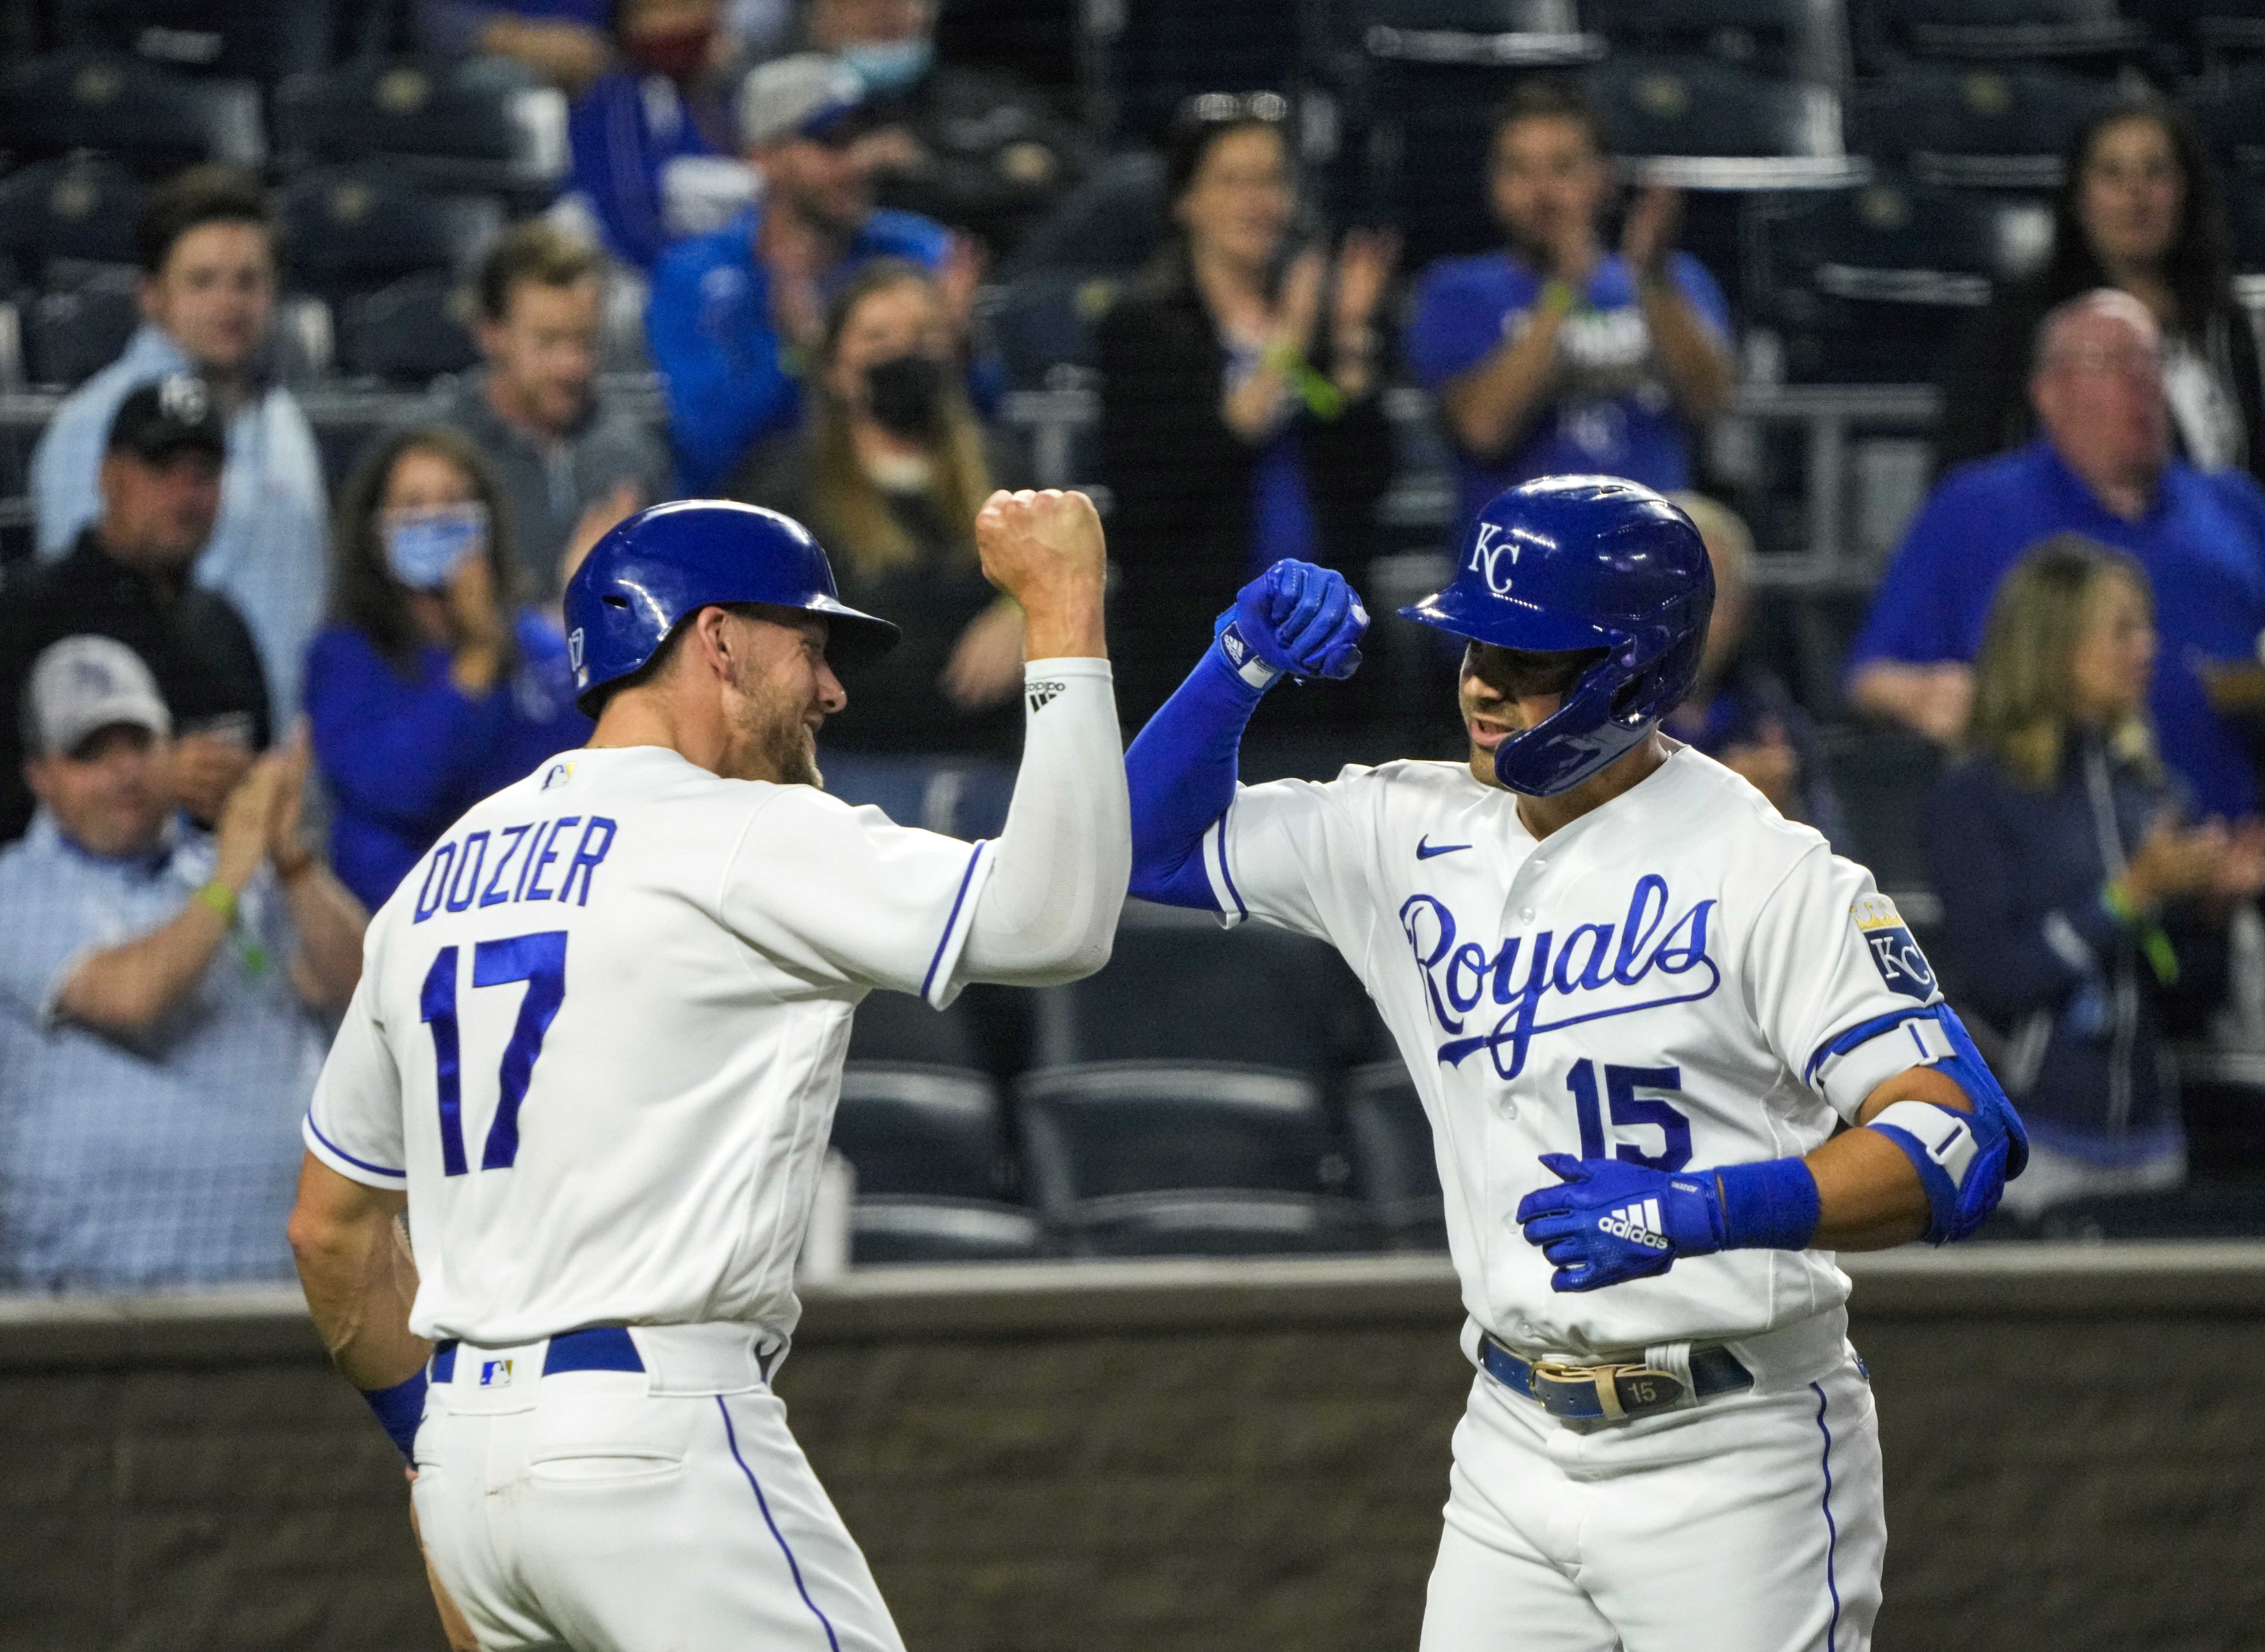 Kansas City Royals second baseman Whit Merrifield (15) is congratulated by third baseman Hunter Dozier (17) after hitting a home run against the Cleveland Indians during the fourth inning at Kauffman Stadium.